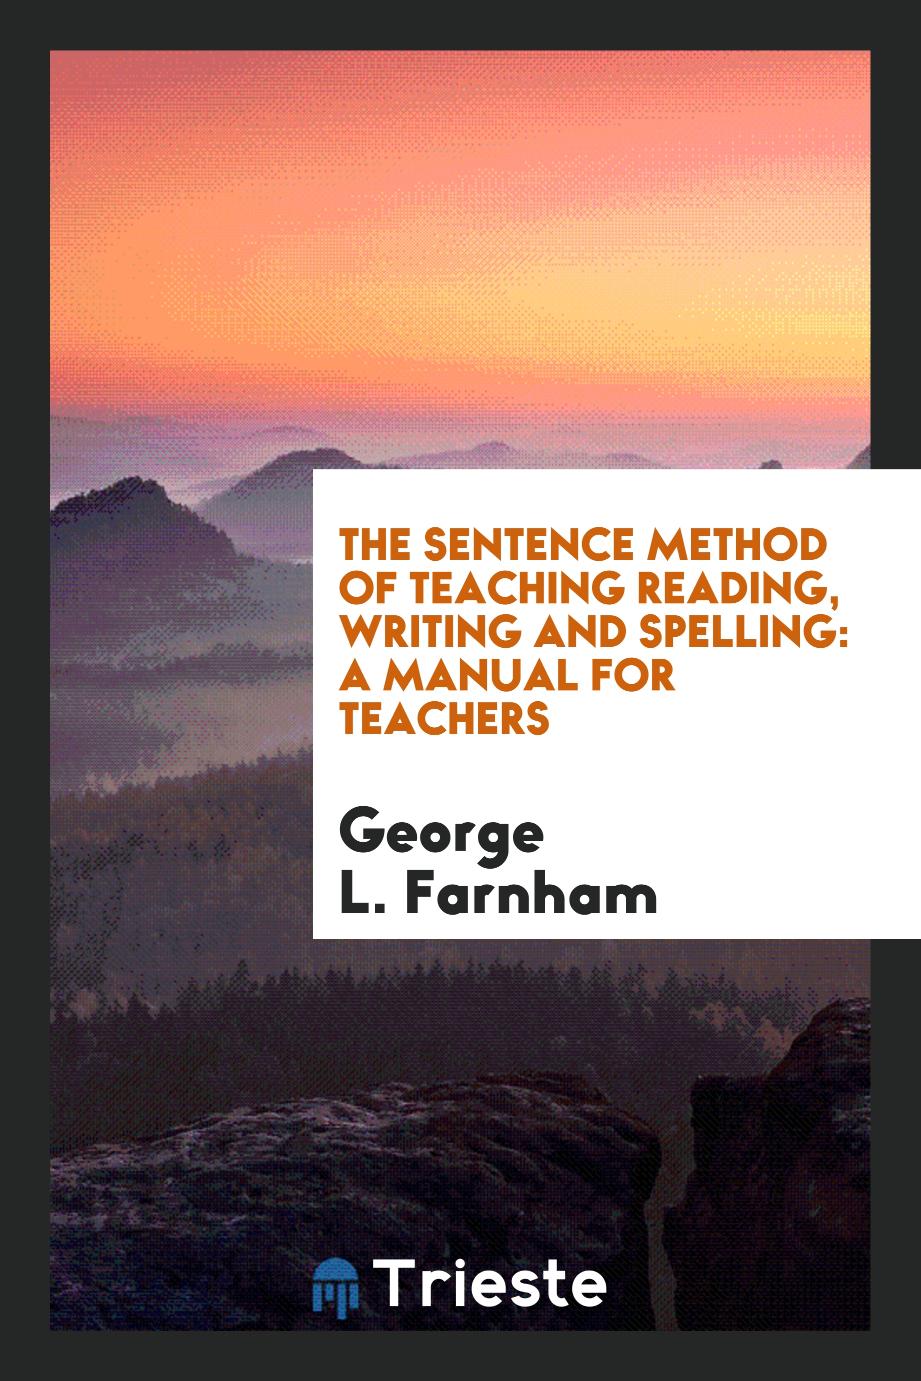 The Sentence Method of Teaching Reading, Writing and Spelling: A Manual for Teachers